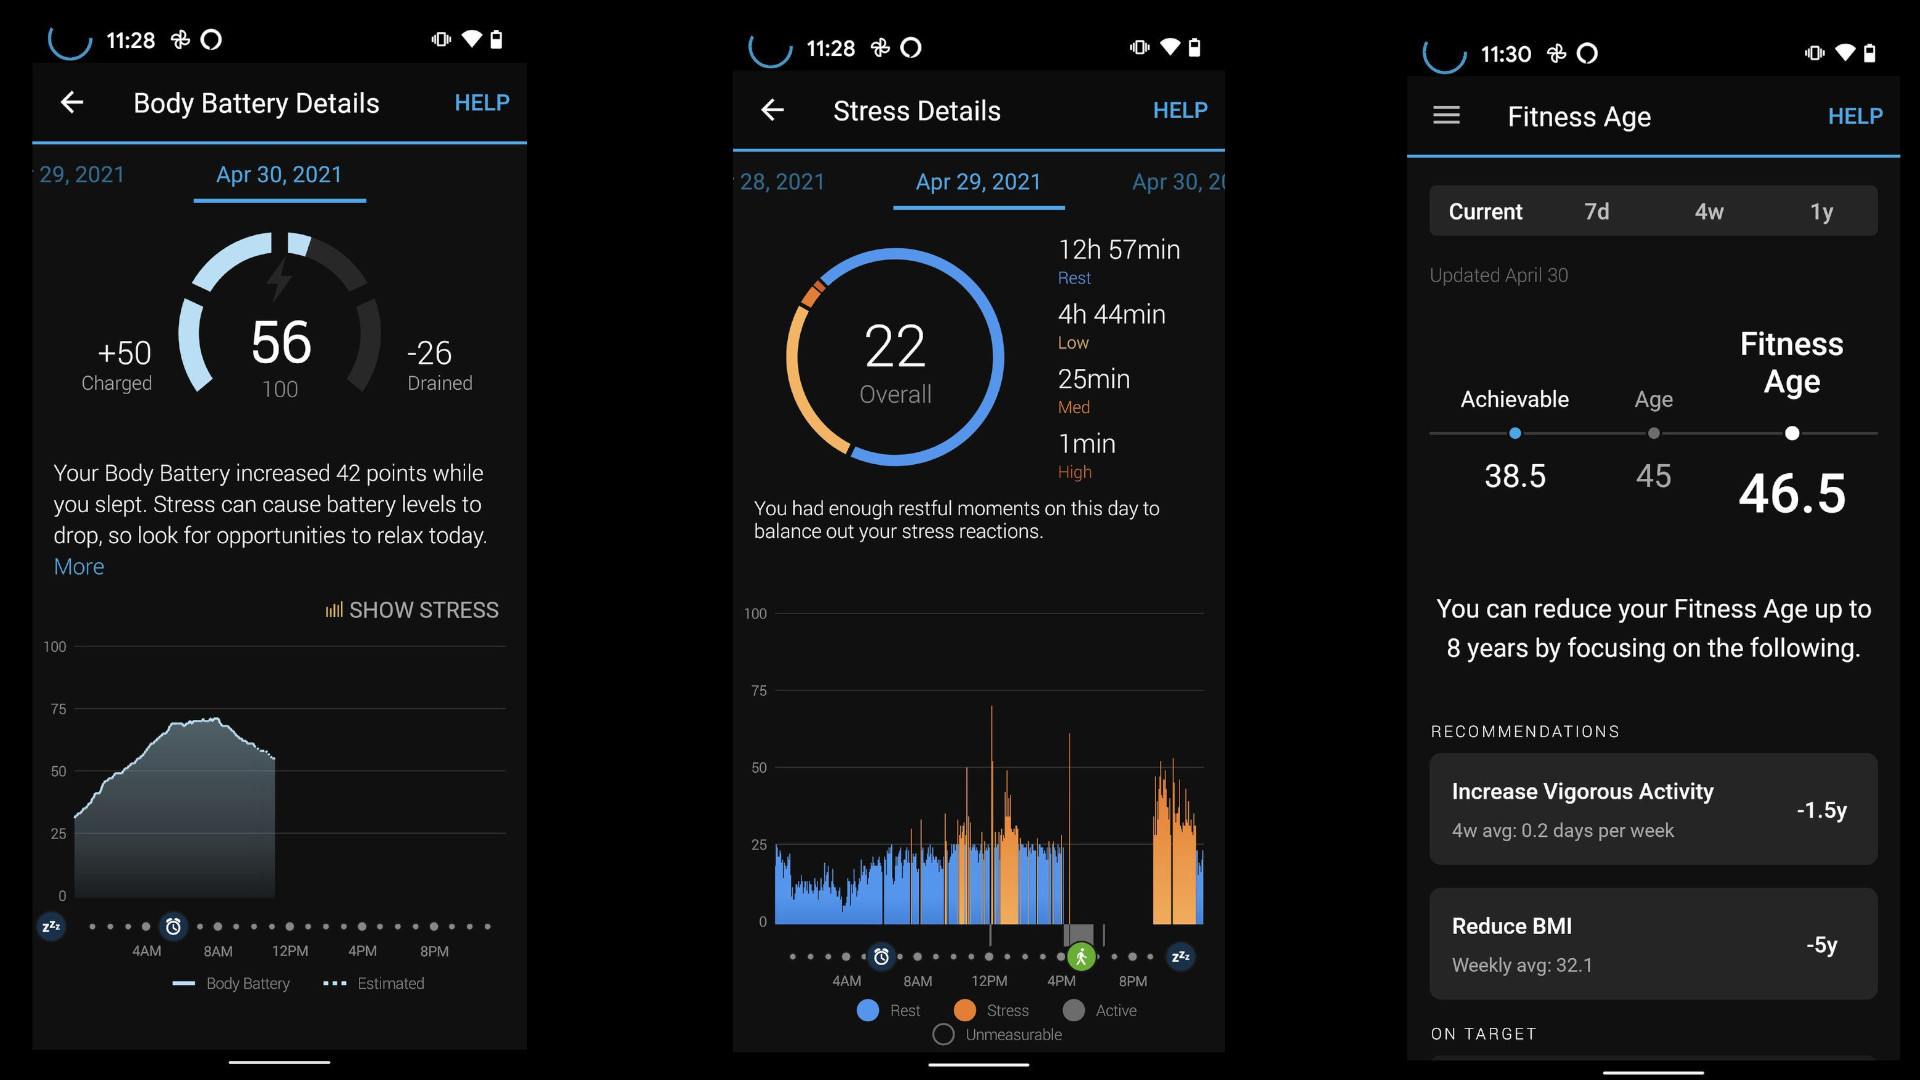 Garmin Venu 2 screenshots showing Body Battery, Stress Details, and Fitness Age tracking